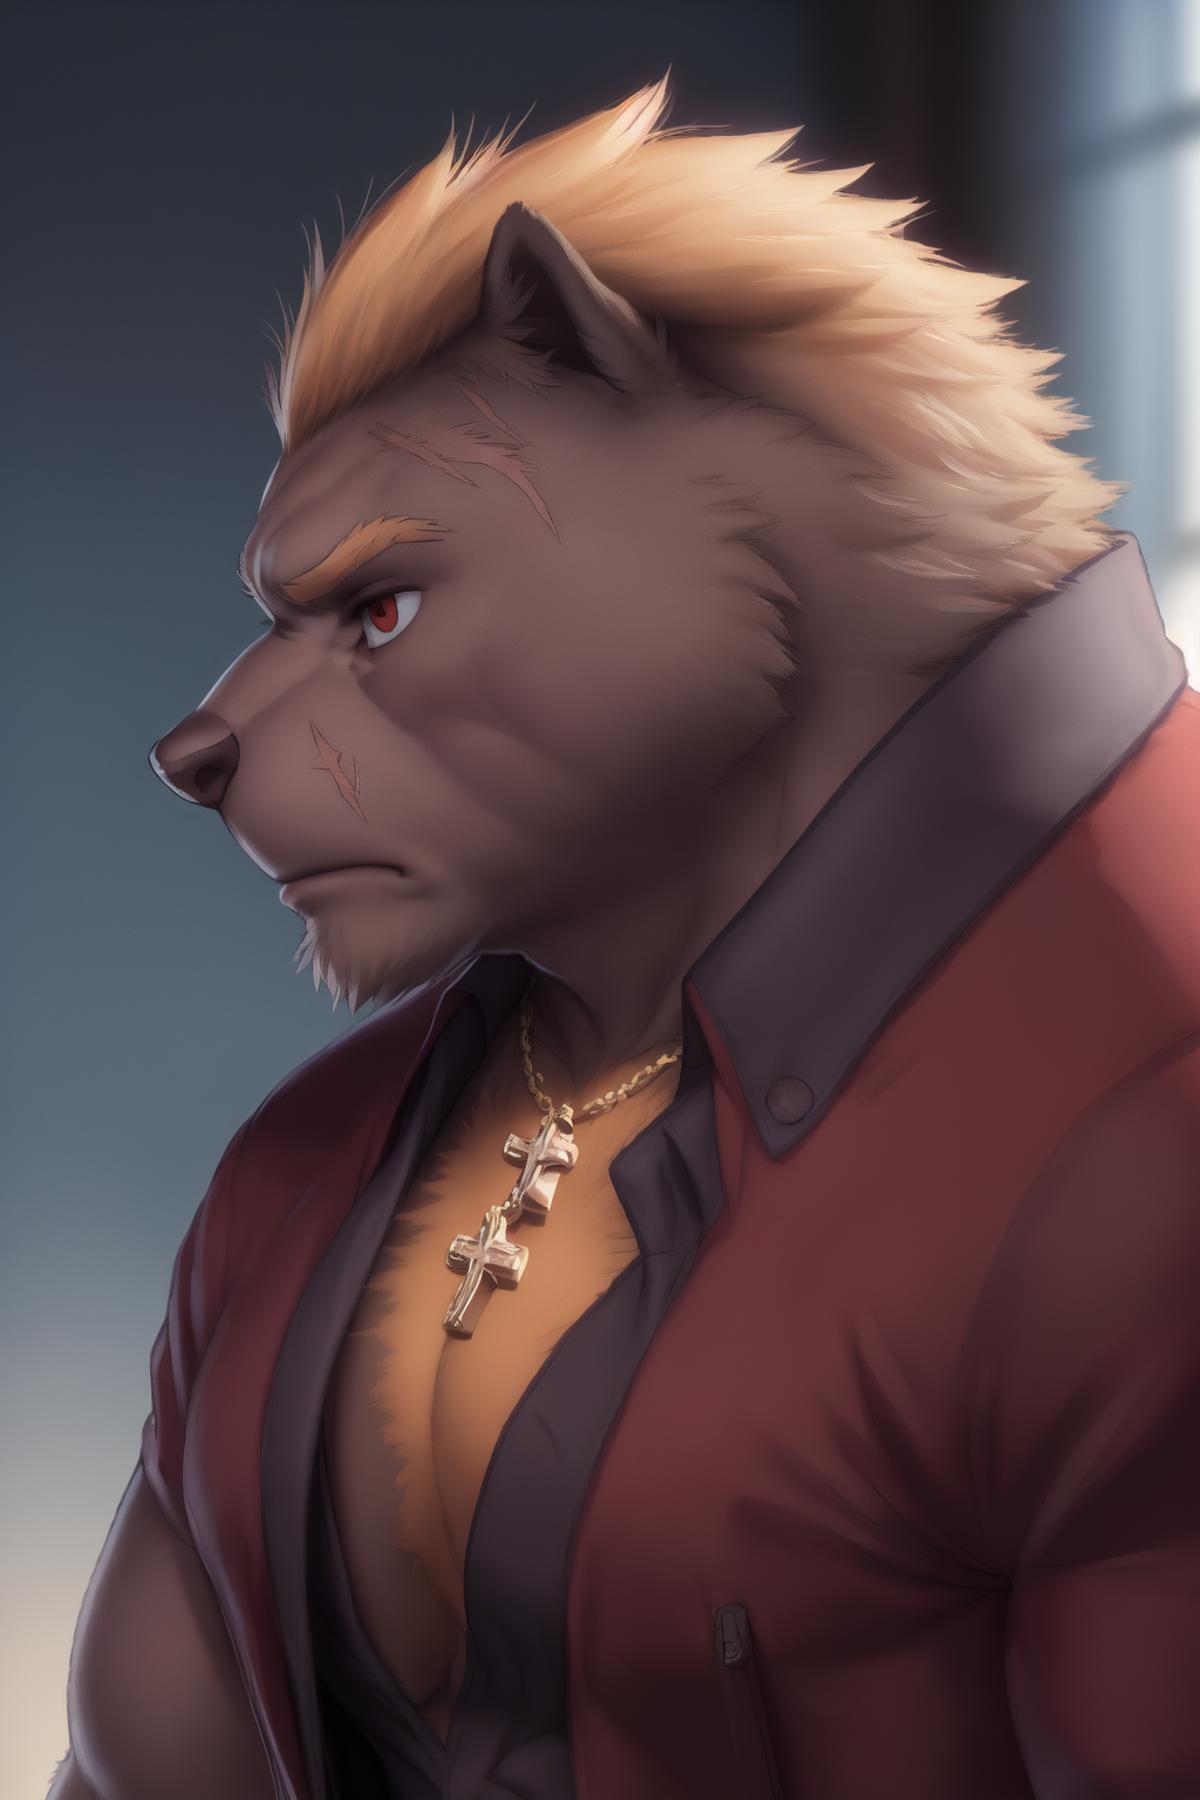 Barguest - Housamo/TAS image by Orion_12